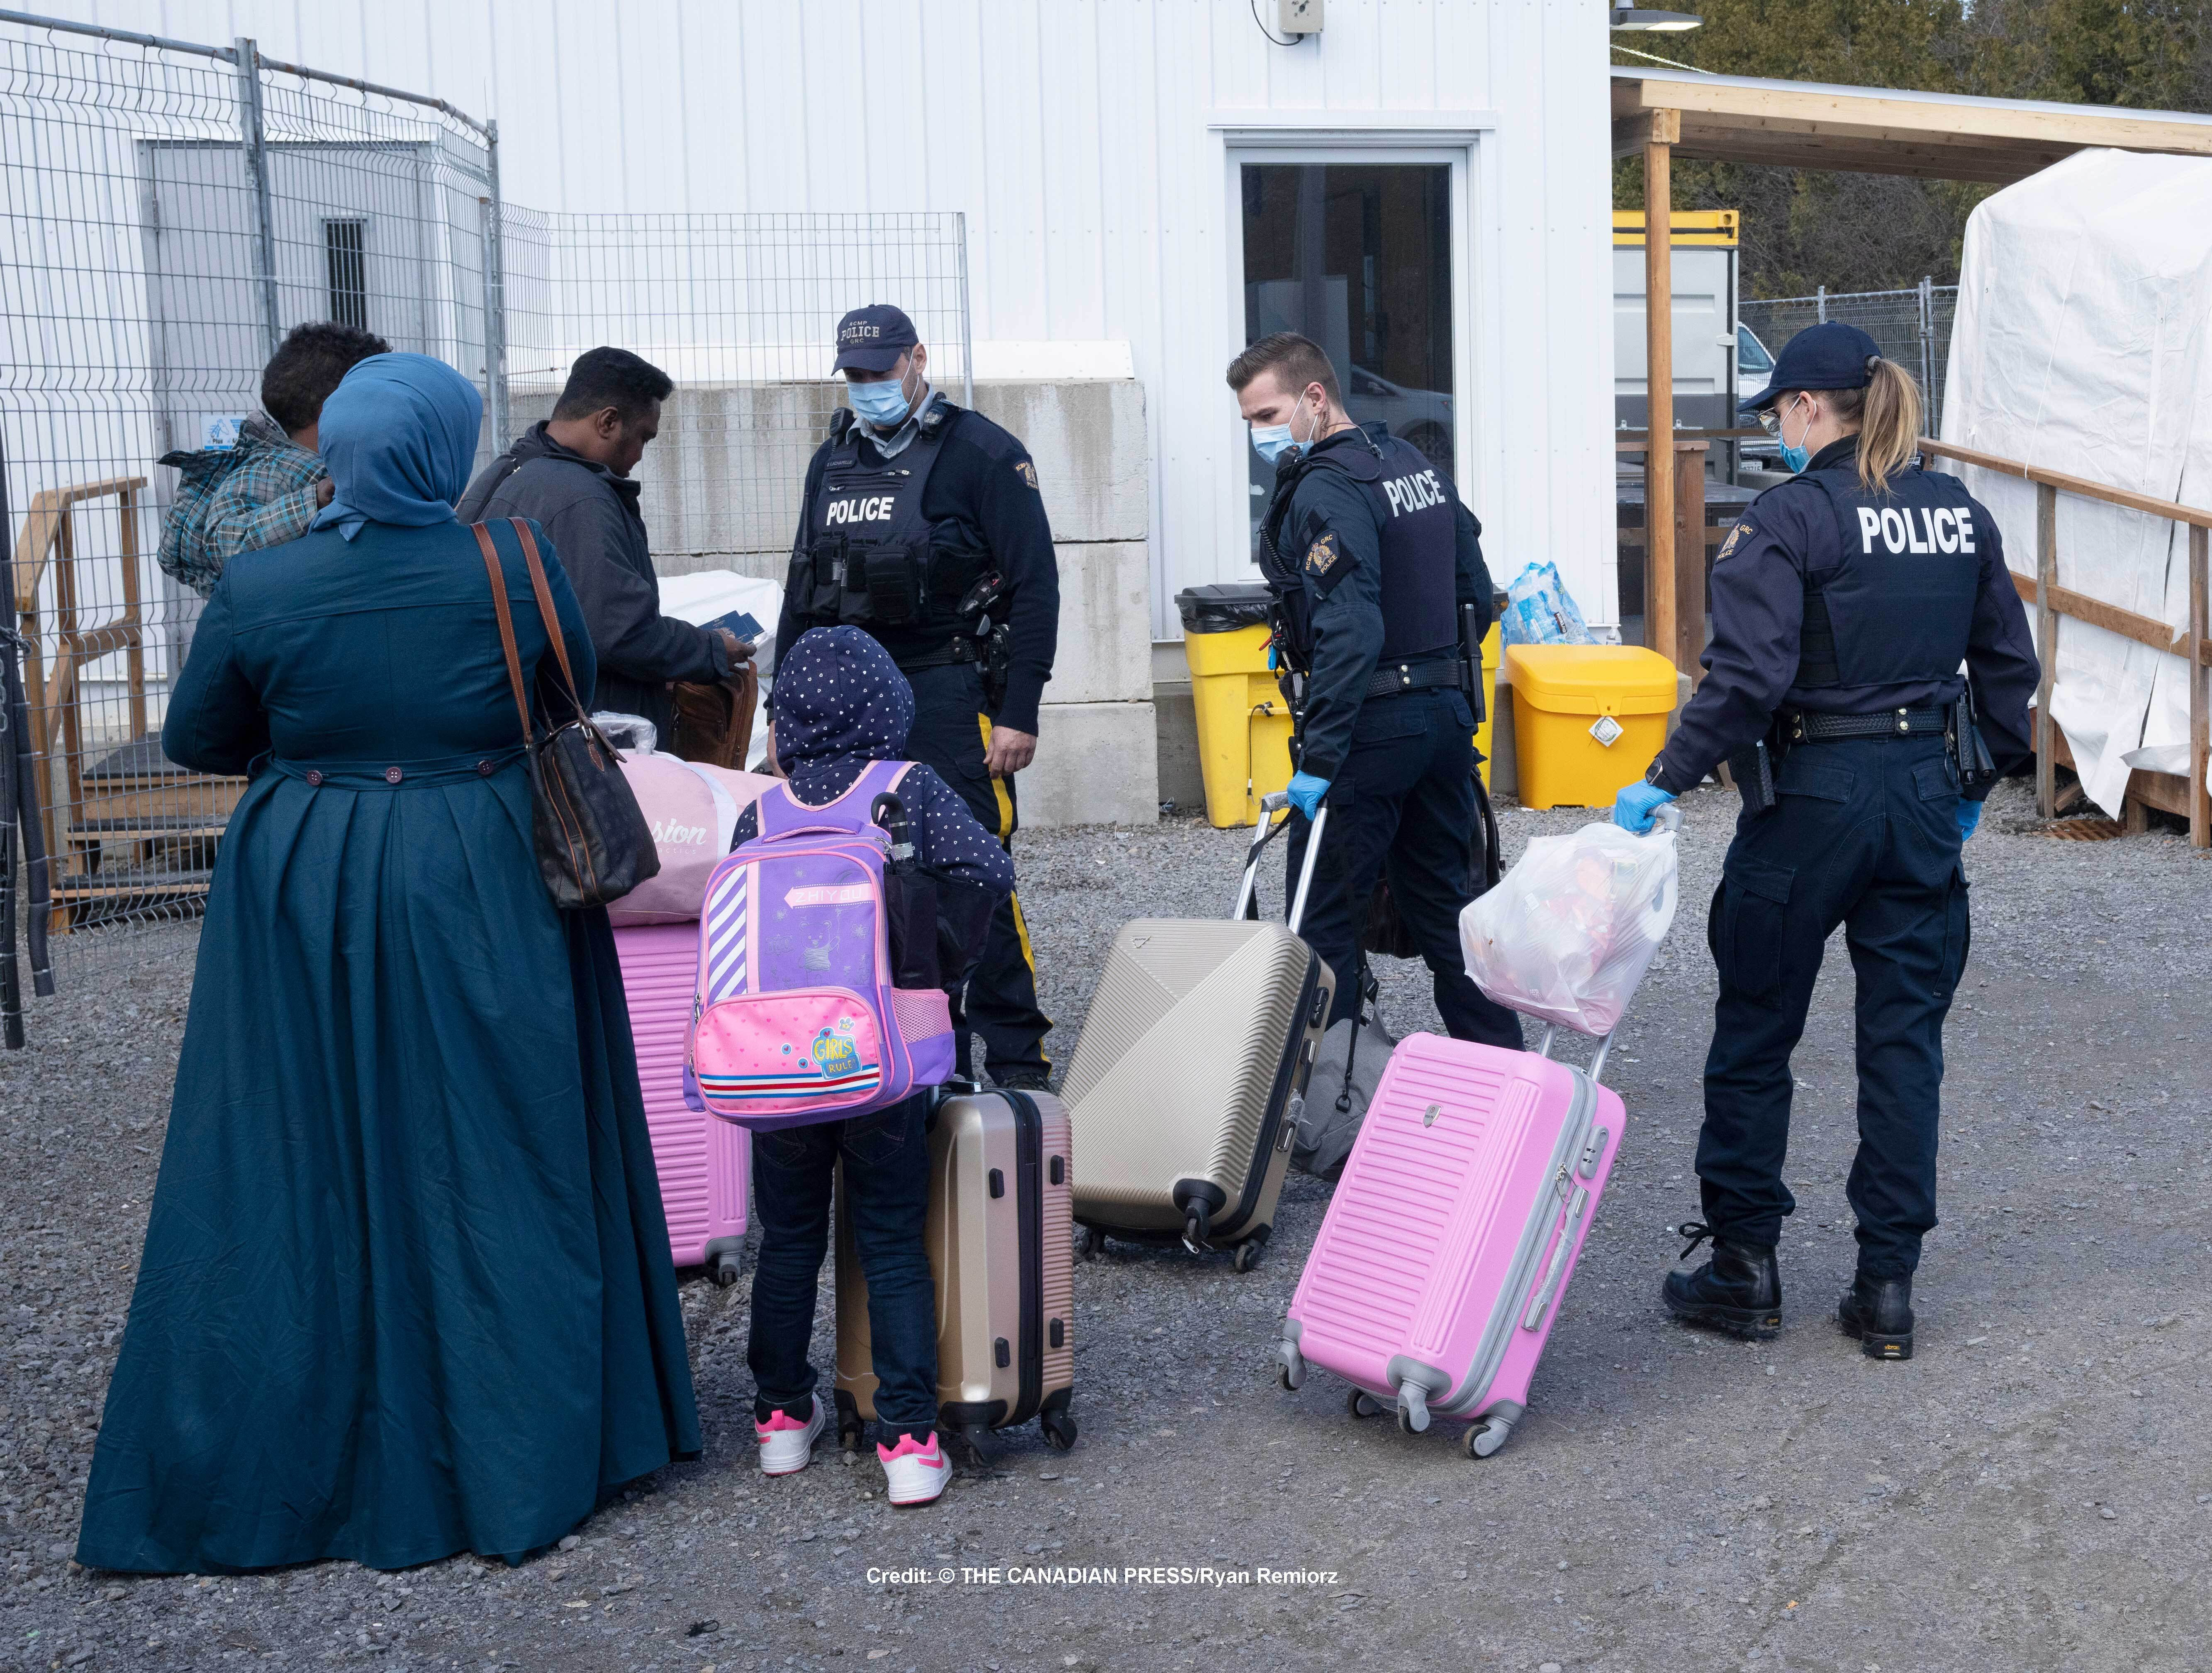 RCMP officers help asylum seekers as they cross the border into Canada at Roxham Road on March 24, 2023.